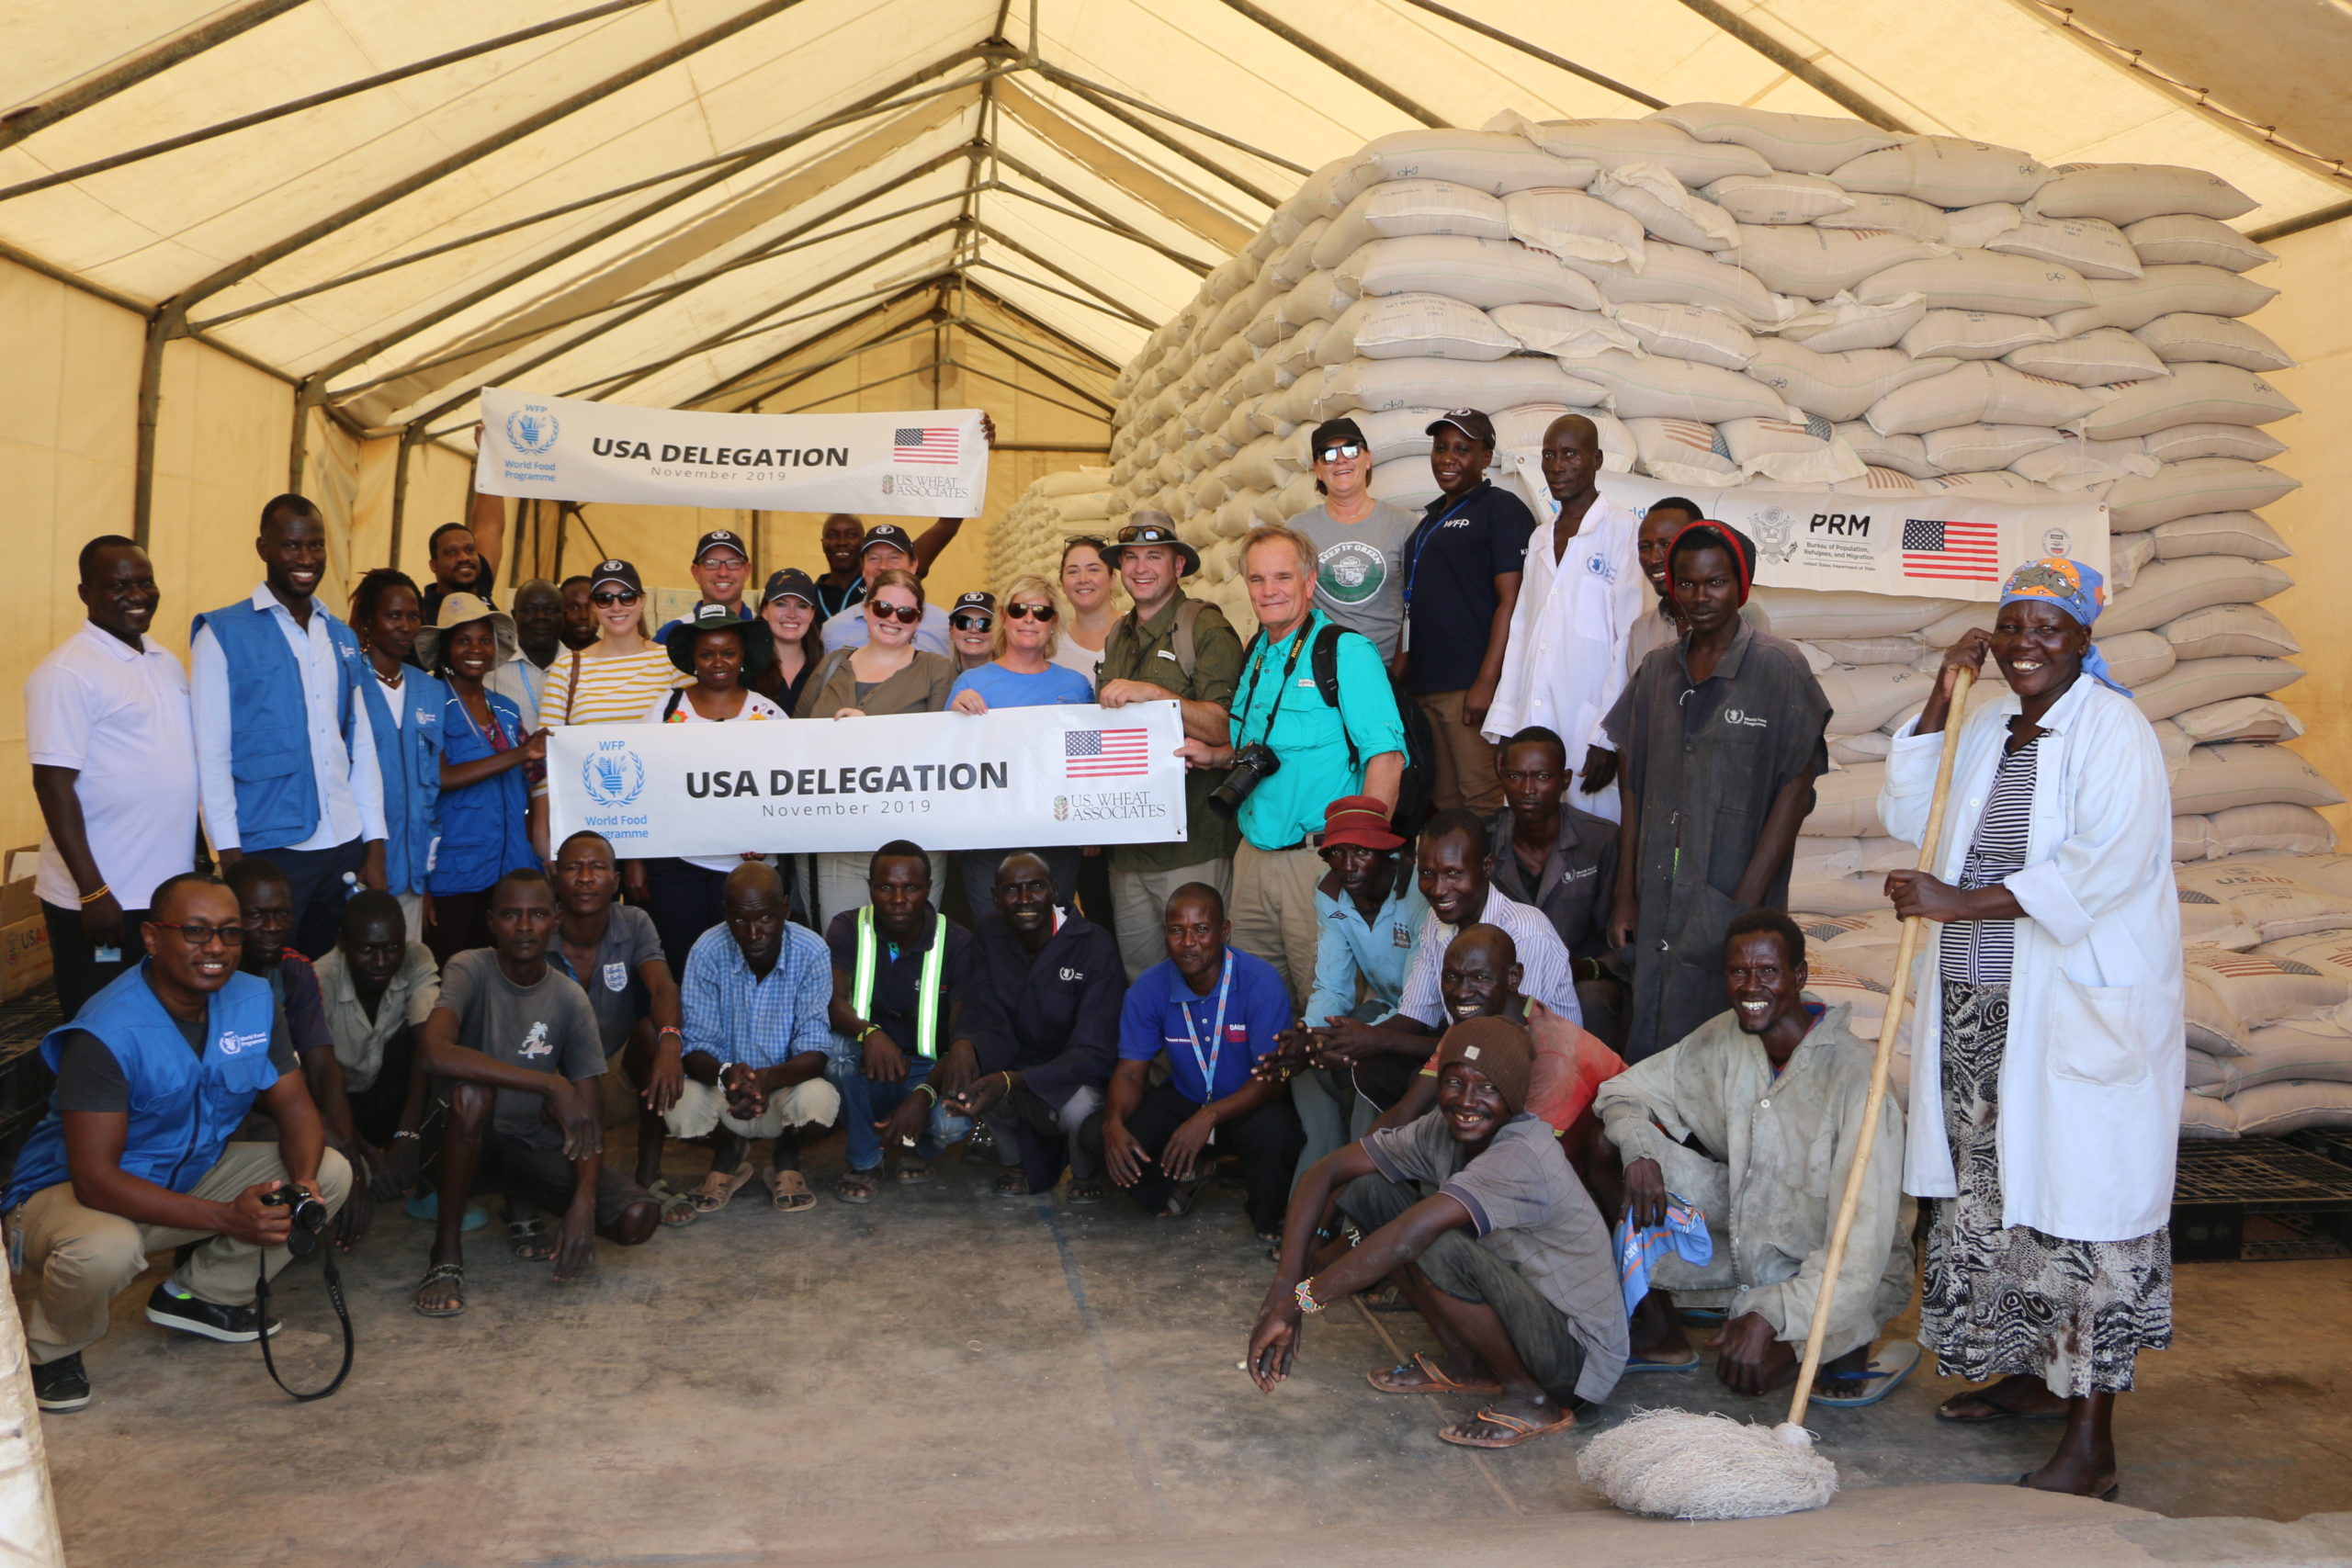 In 2017, a group of U.S. wheat farmers visited Kenya and Tanzania to observe how food aid donations of wheat help alleviate food insecurity.